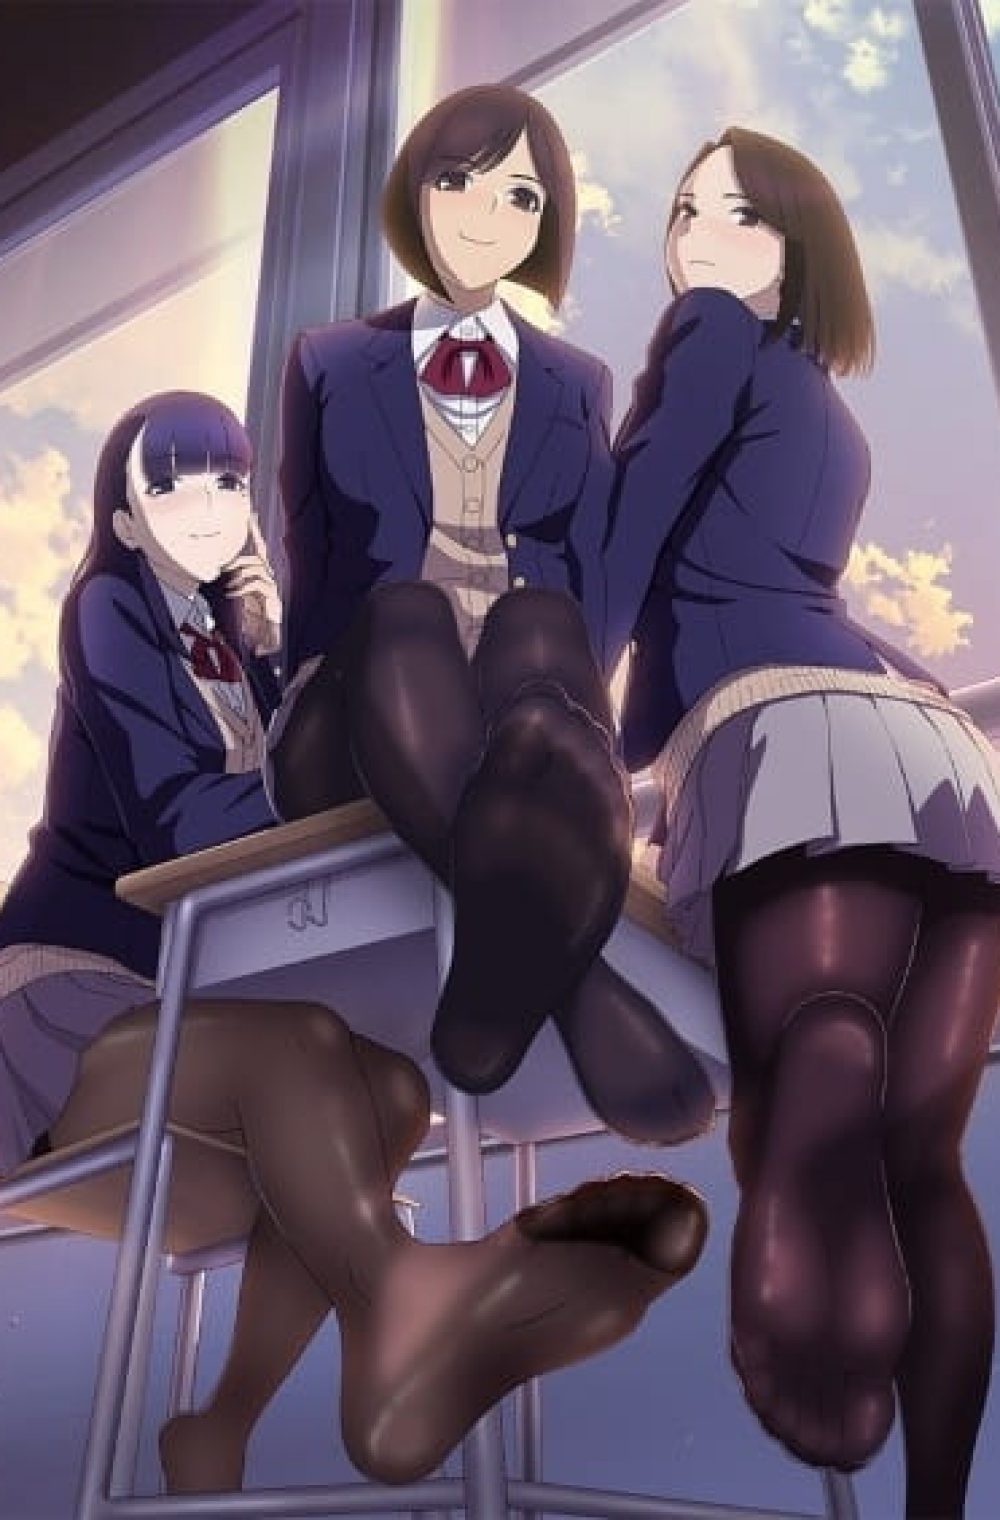 Miru Tights Anime's 1st Episode Streamed With English Subtitles